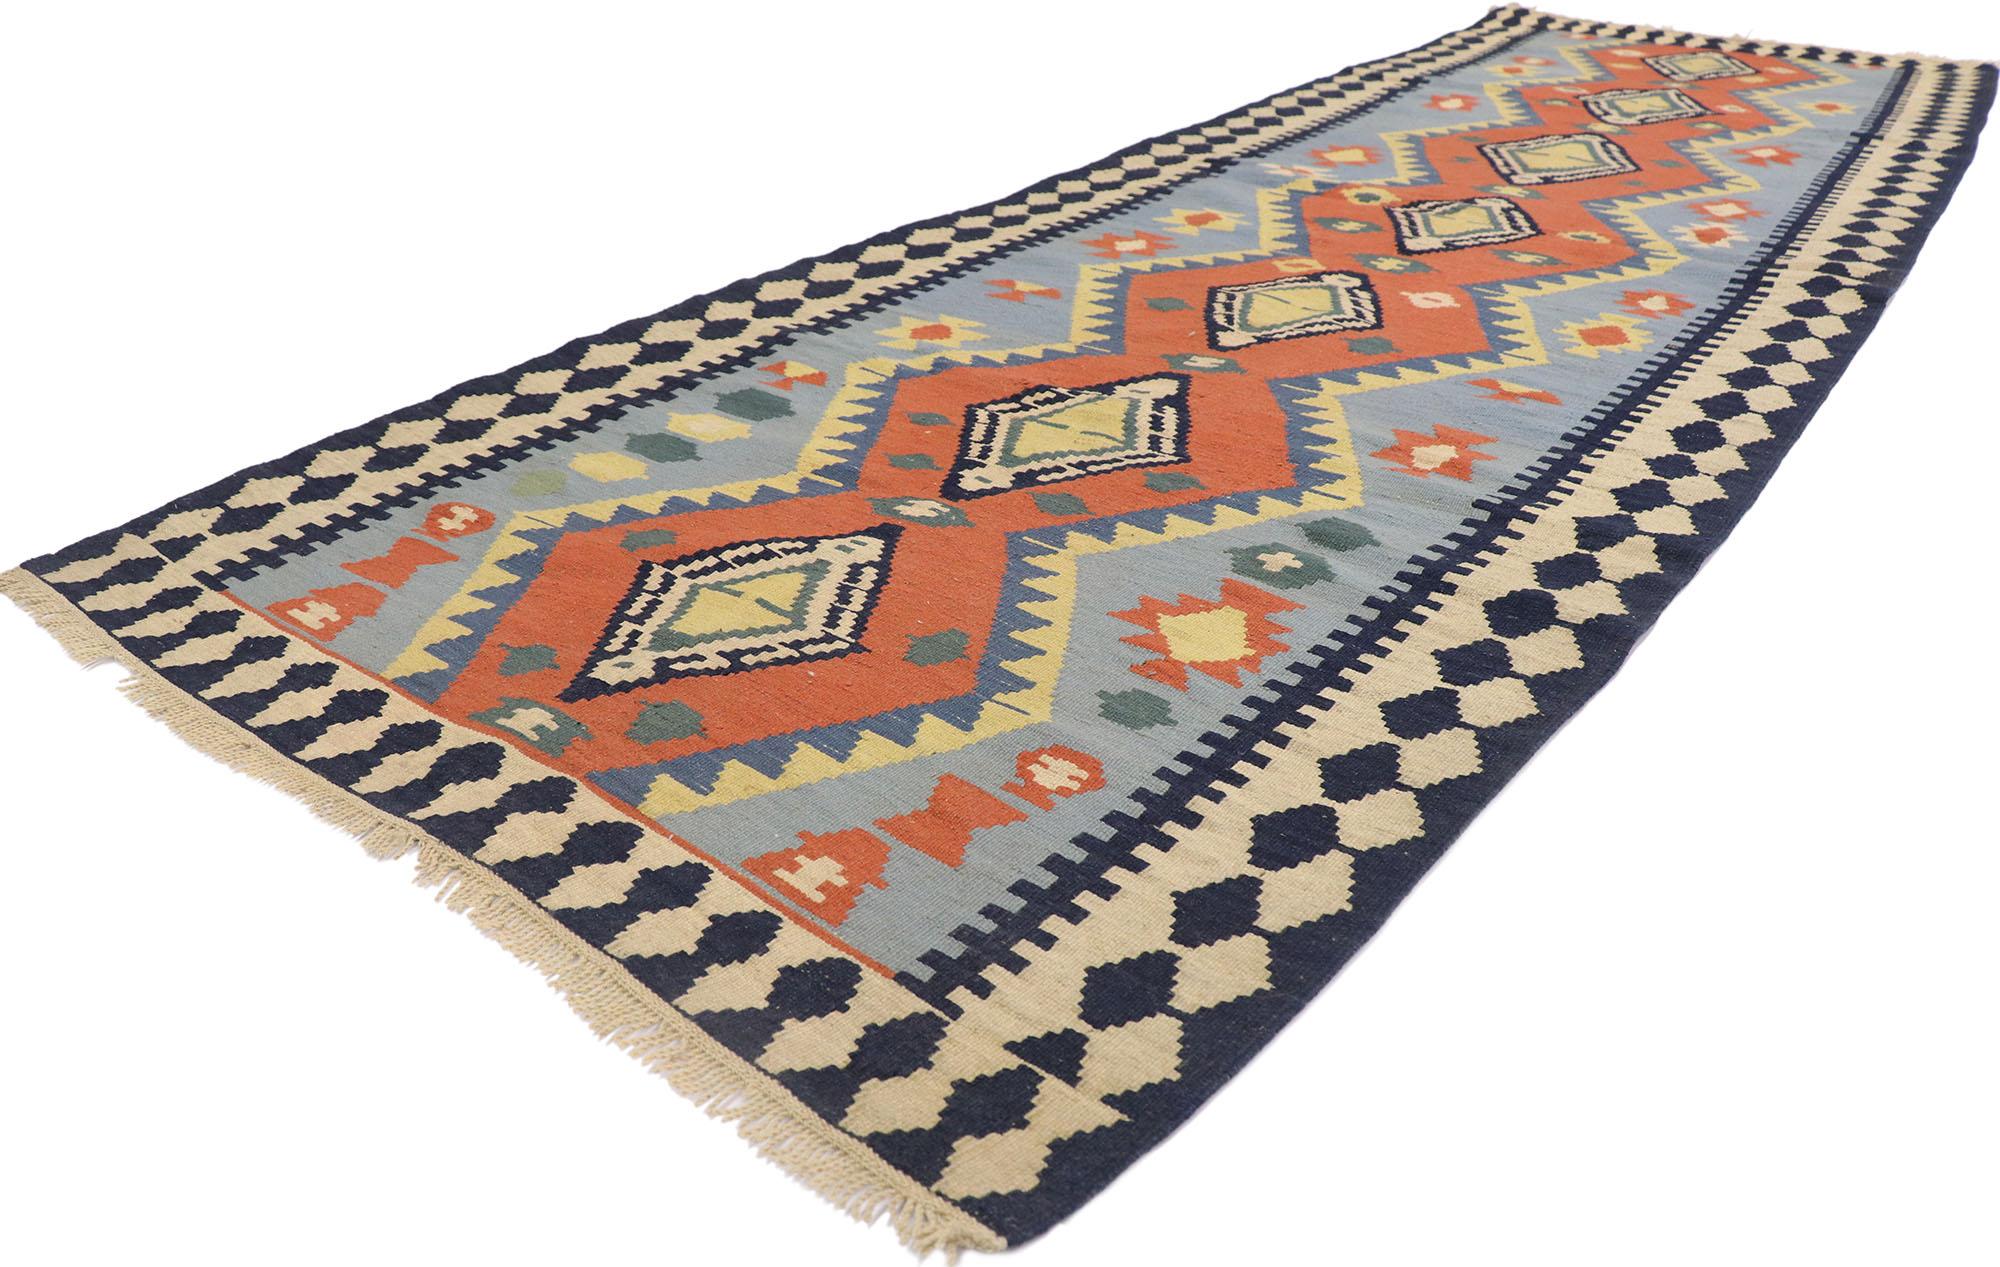 77933 Vintage Persian Shiraz Kilim runner with Tribal Style 03'06 x 10'09. Full of tiny details and a bold expressive design combined with vibrant colors and tribal style, this hand-woven wool vintage Persian Shiraz kilim runner is a captivating